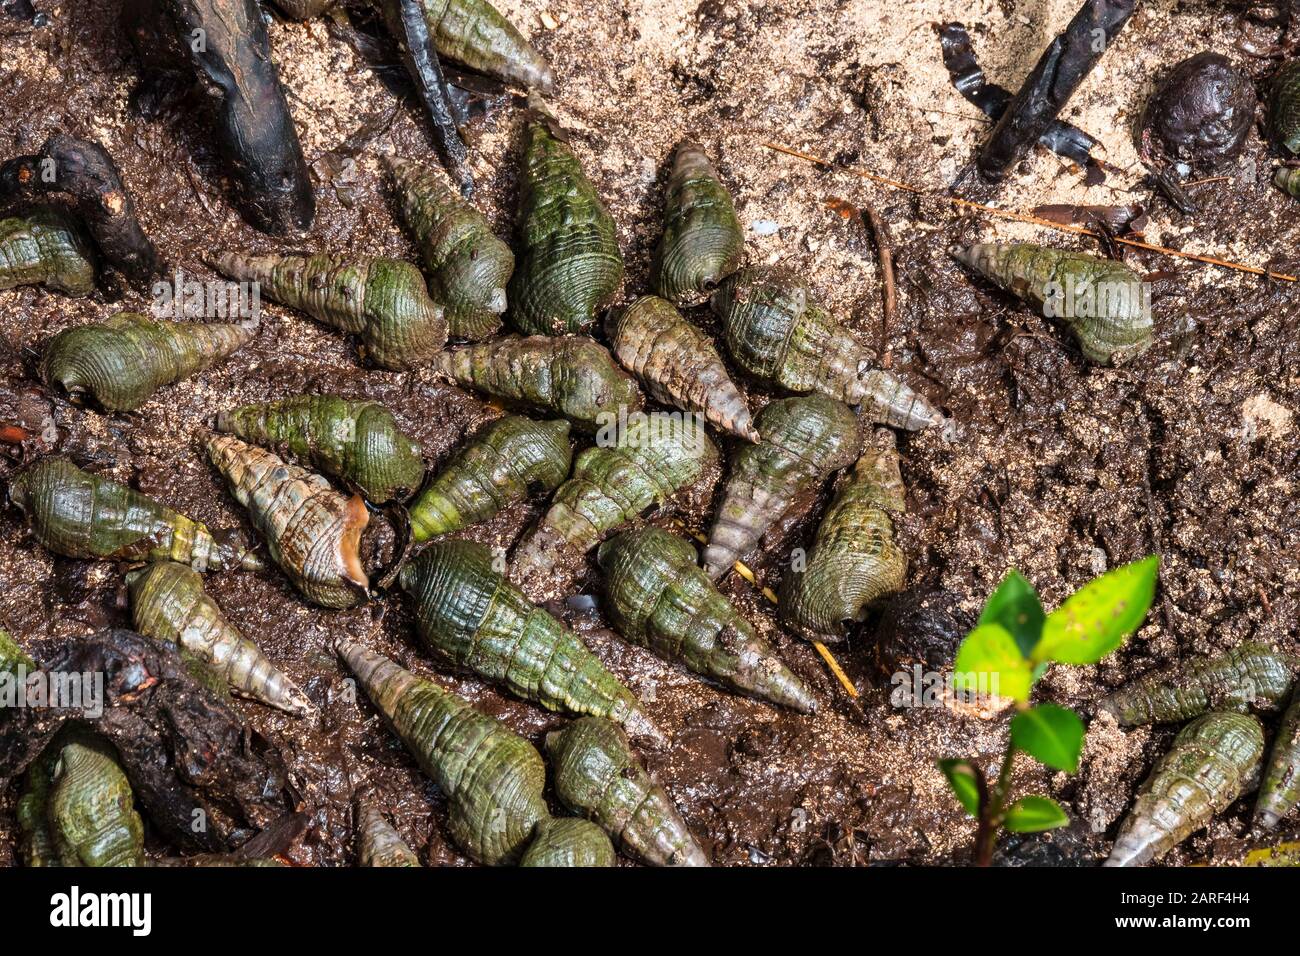 Snail shells in the Jungle of the island of Curieuse, Seychelles in the Indian Ocean, Africa Stock Photo